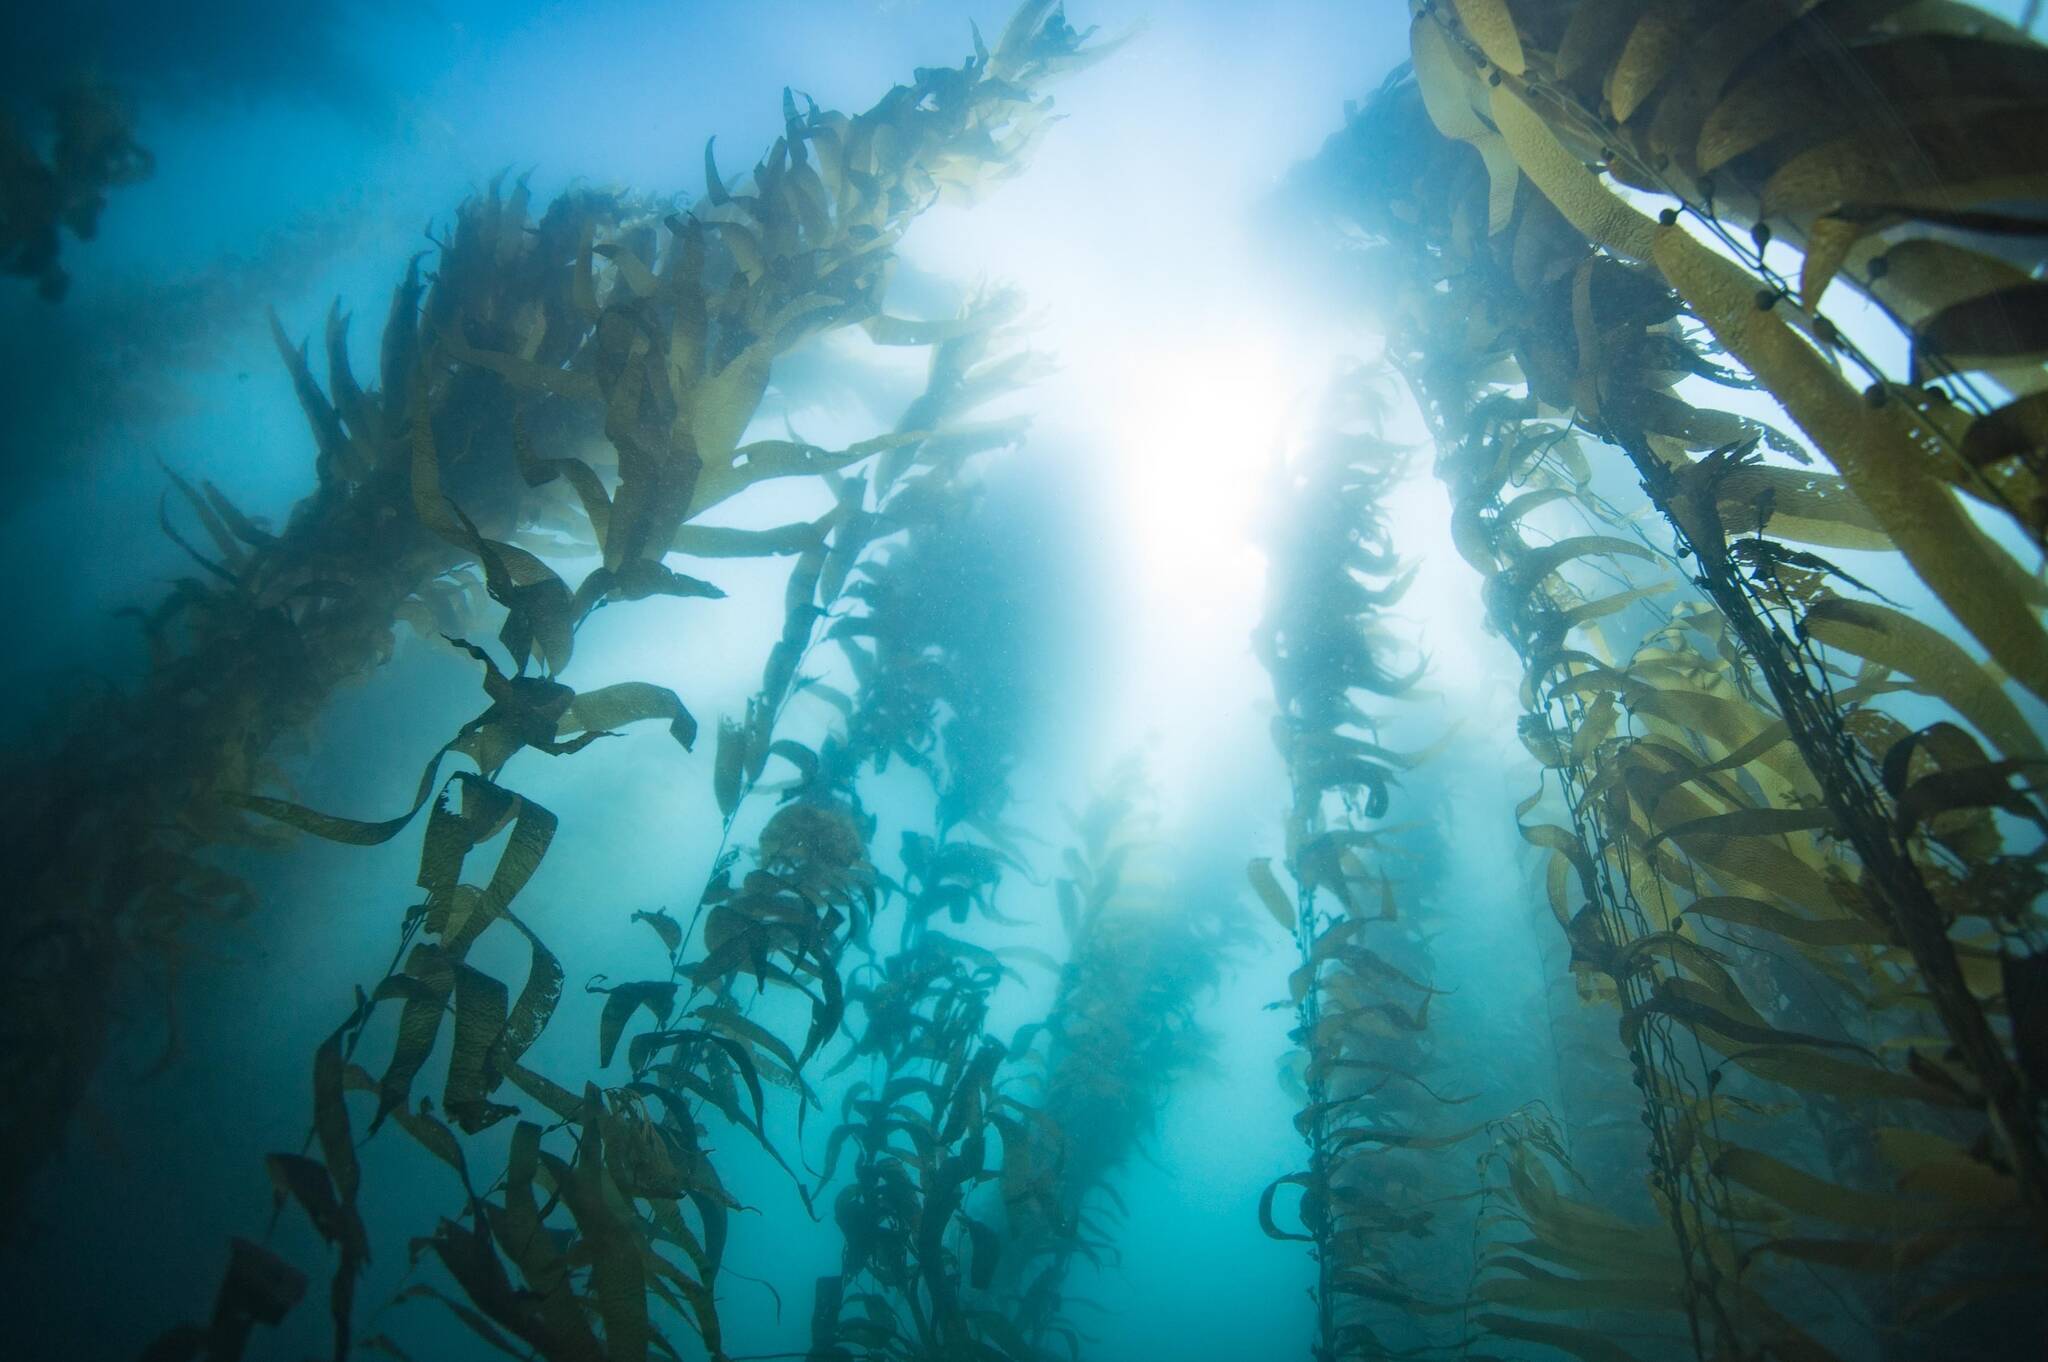 This photo available under a Creative Commons license shows a kelp forest. (Camille Pagniello)